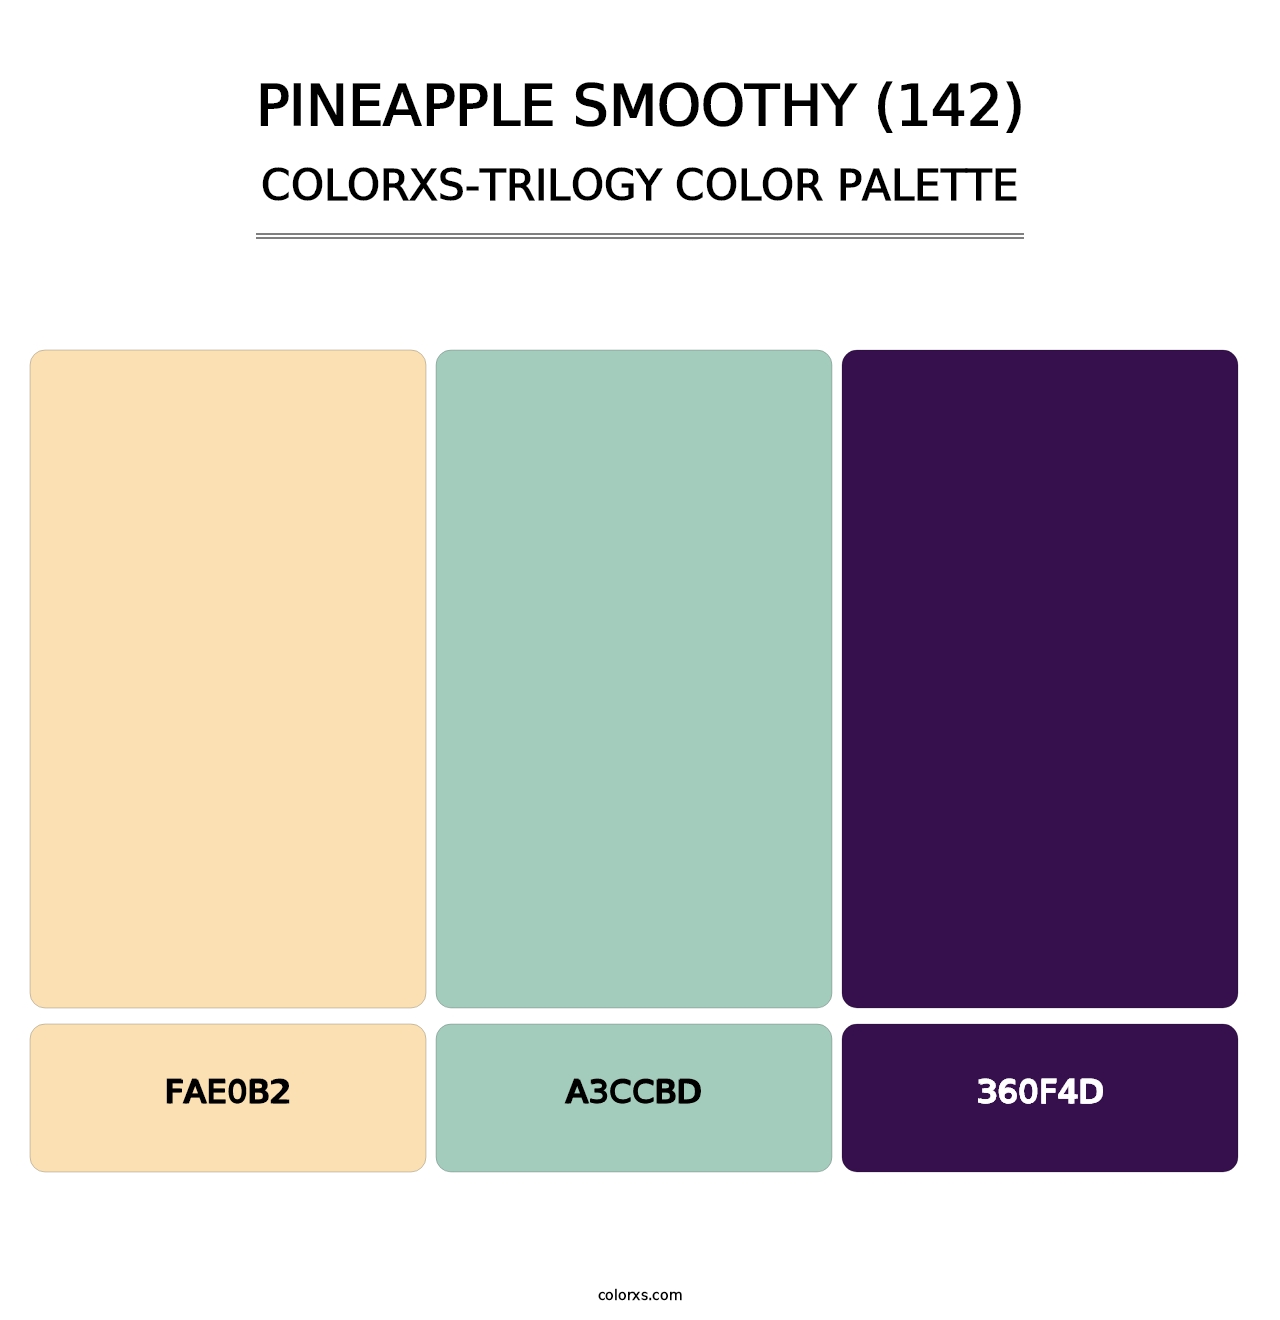 Pineapple Smoothy (142) - Colorxs Trilogy Palette